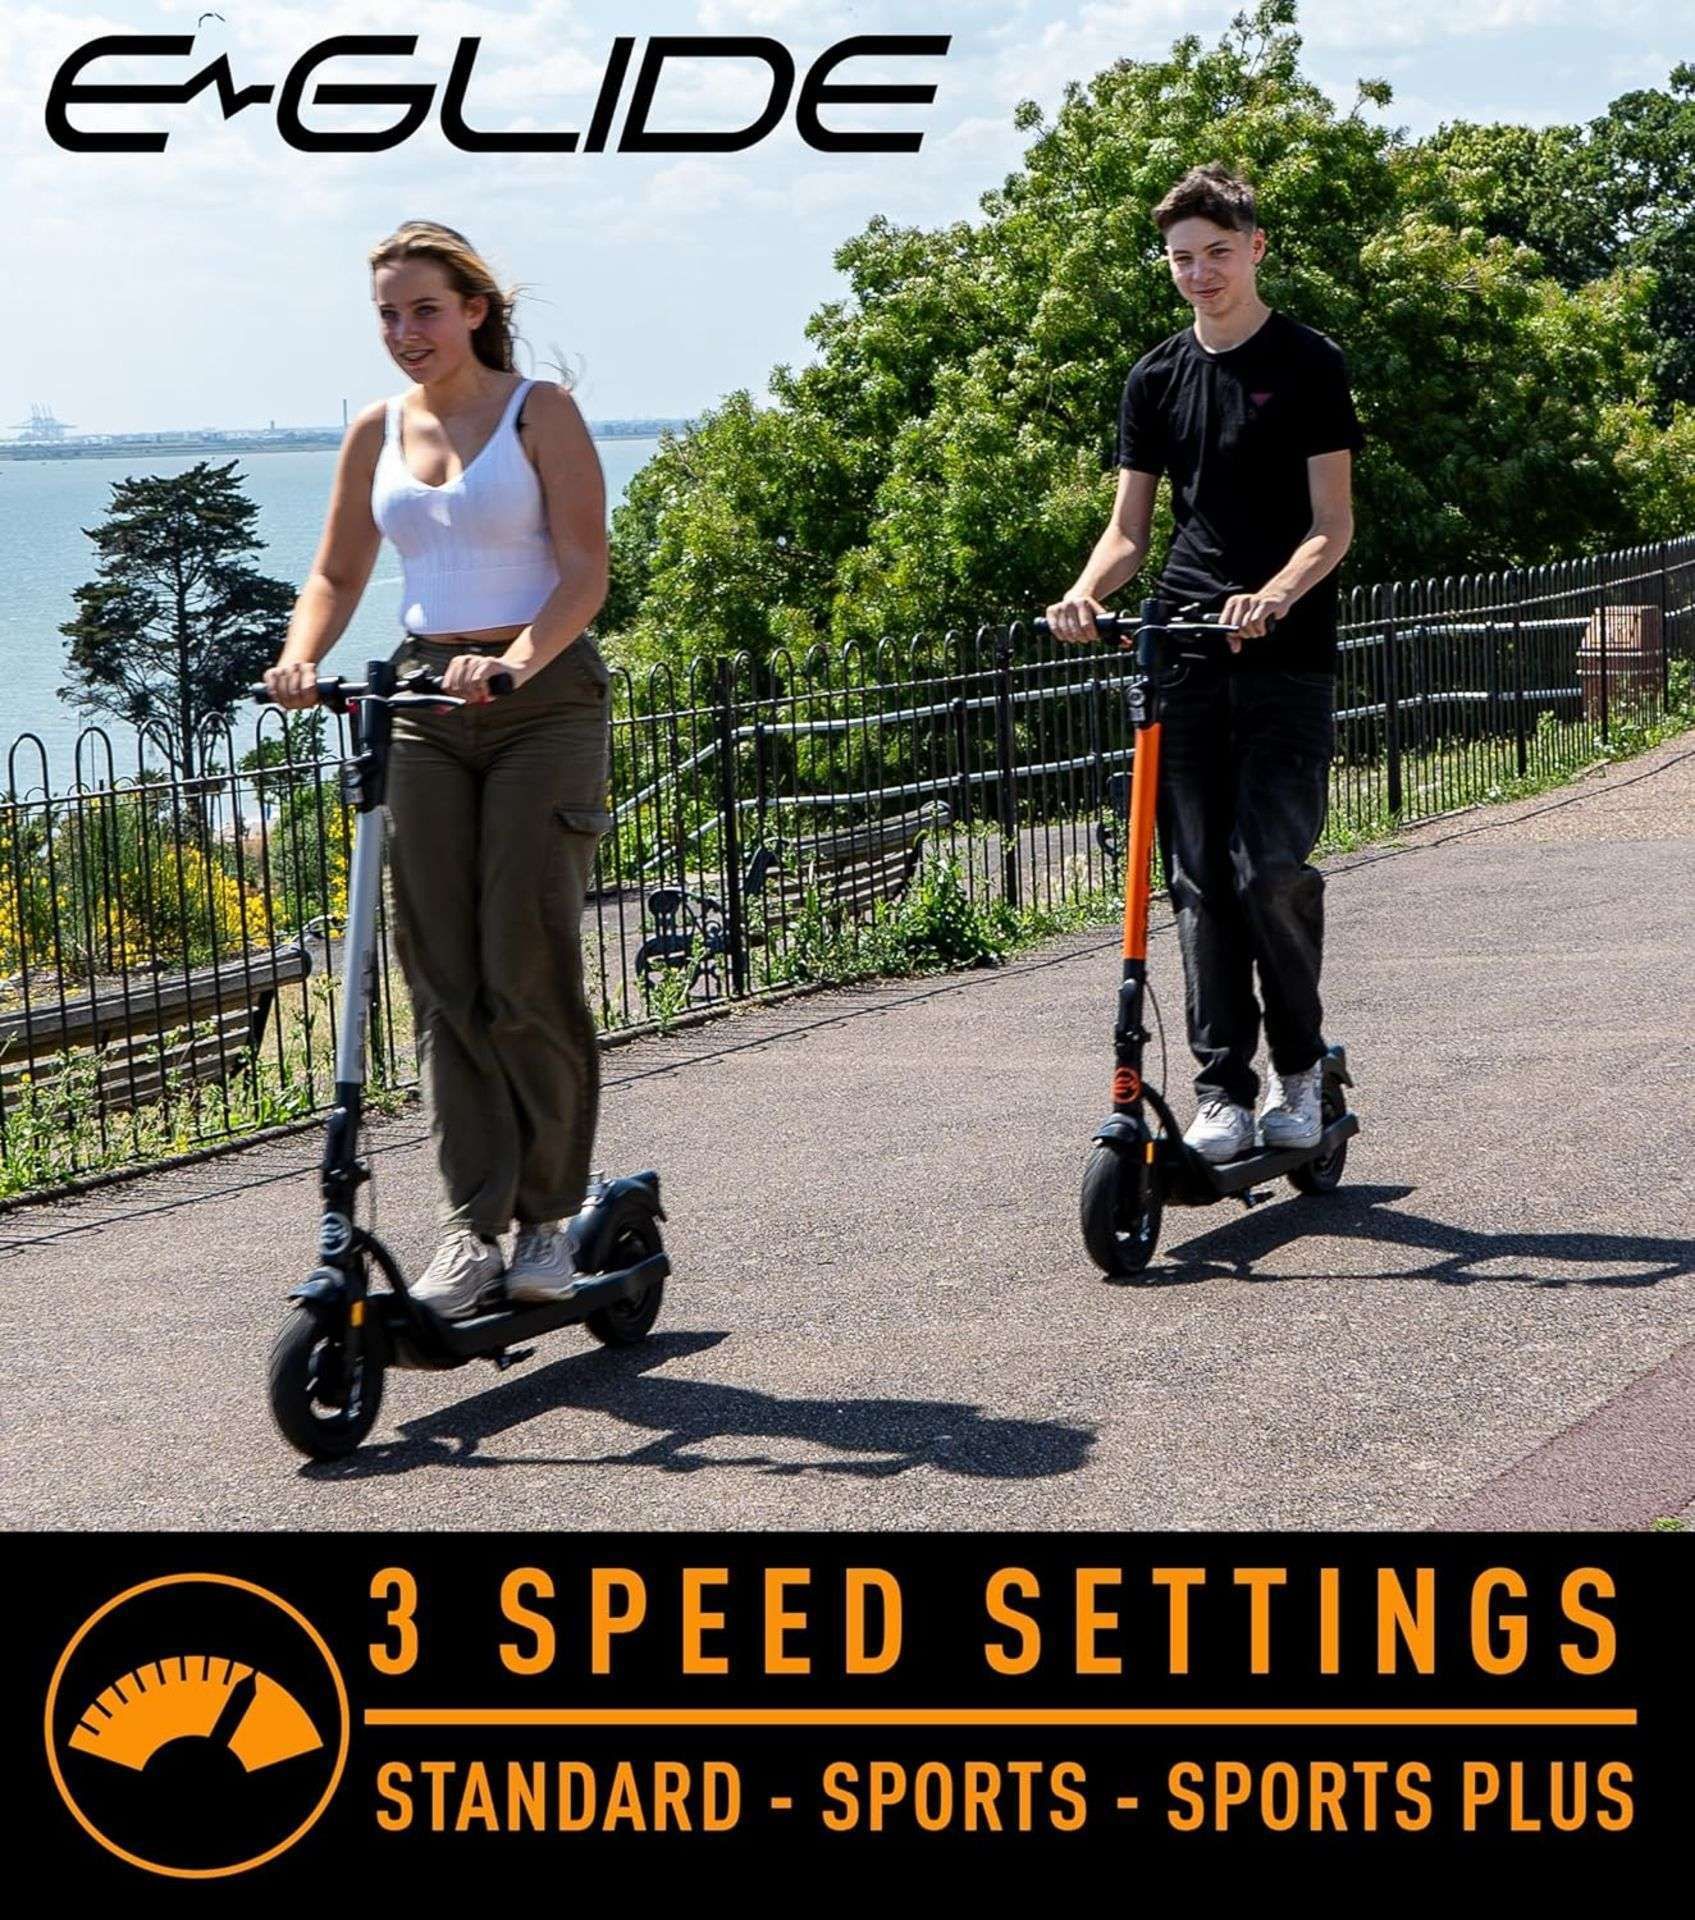 Trade Lot 4 x Brand New E-Glide V2 Electric Scooter Grey and Black RRP £599, Introducing a sleek and - Image 5 of 5